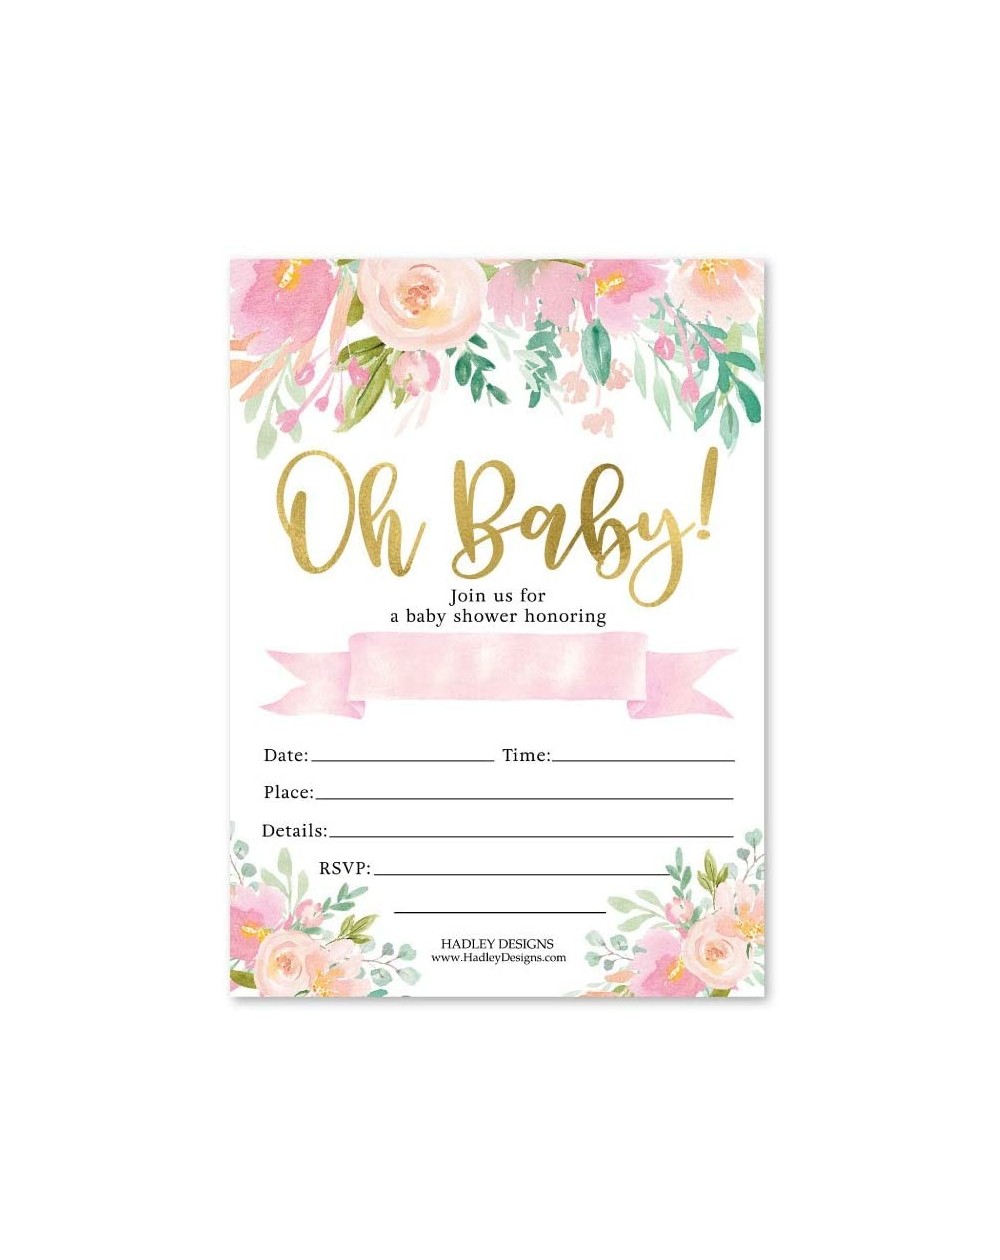 Invitations 25 Pink Floral Baby Shower Invitations- Sprinkle Invite For Girl- Coed Garden Gender Reveal Theme- Cute Watercolo...